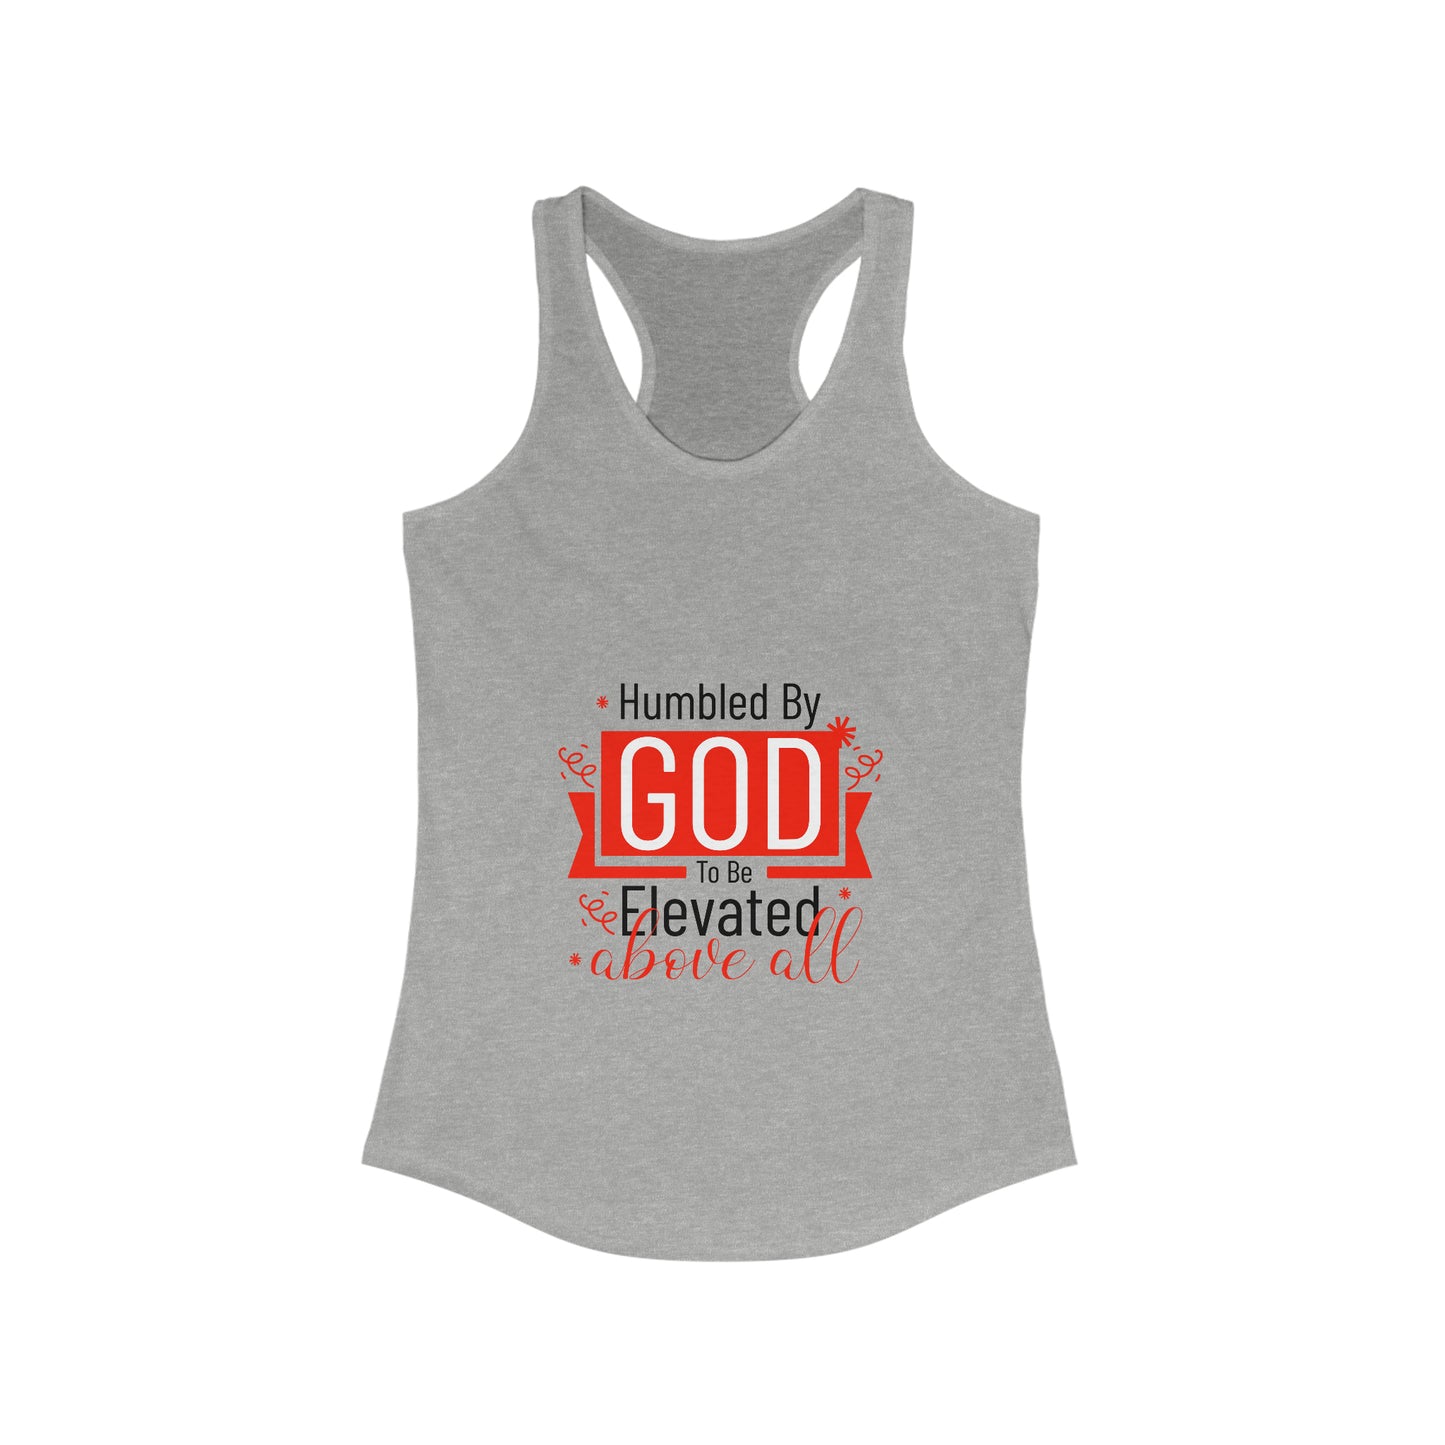 Humbled by God To Be Elevated Above All slim fit tank-top